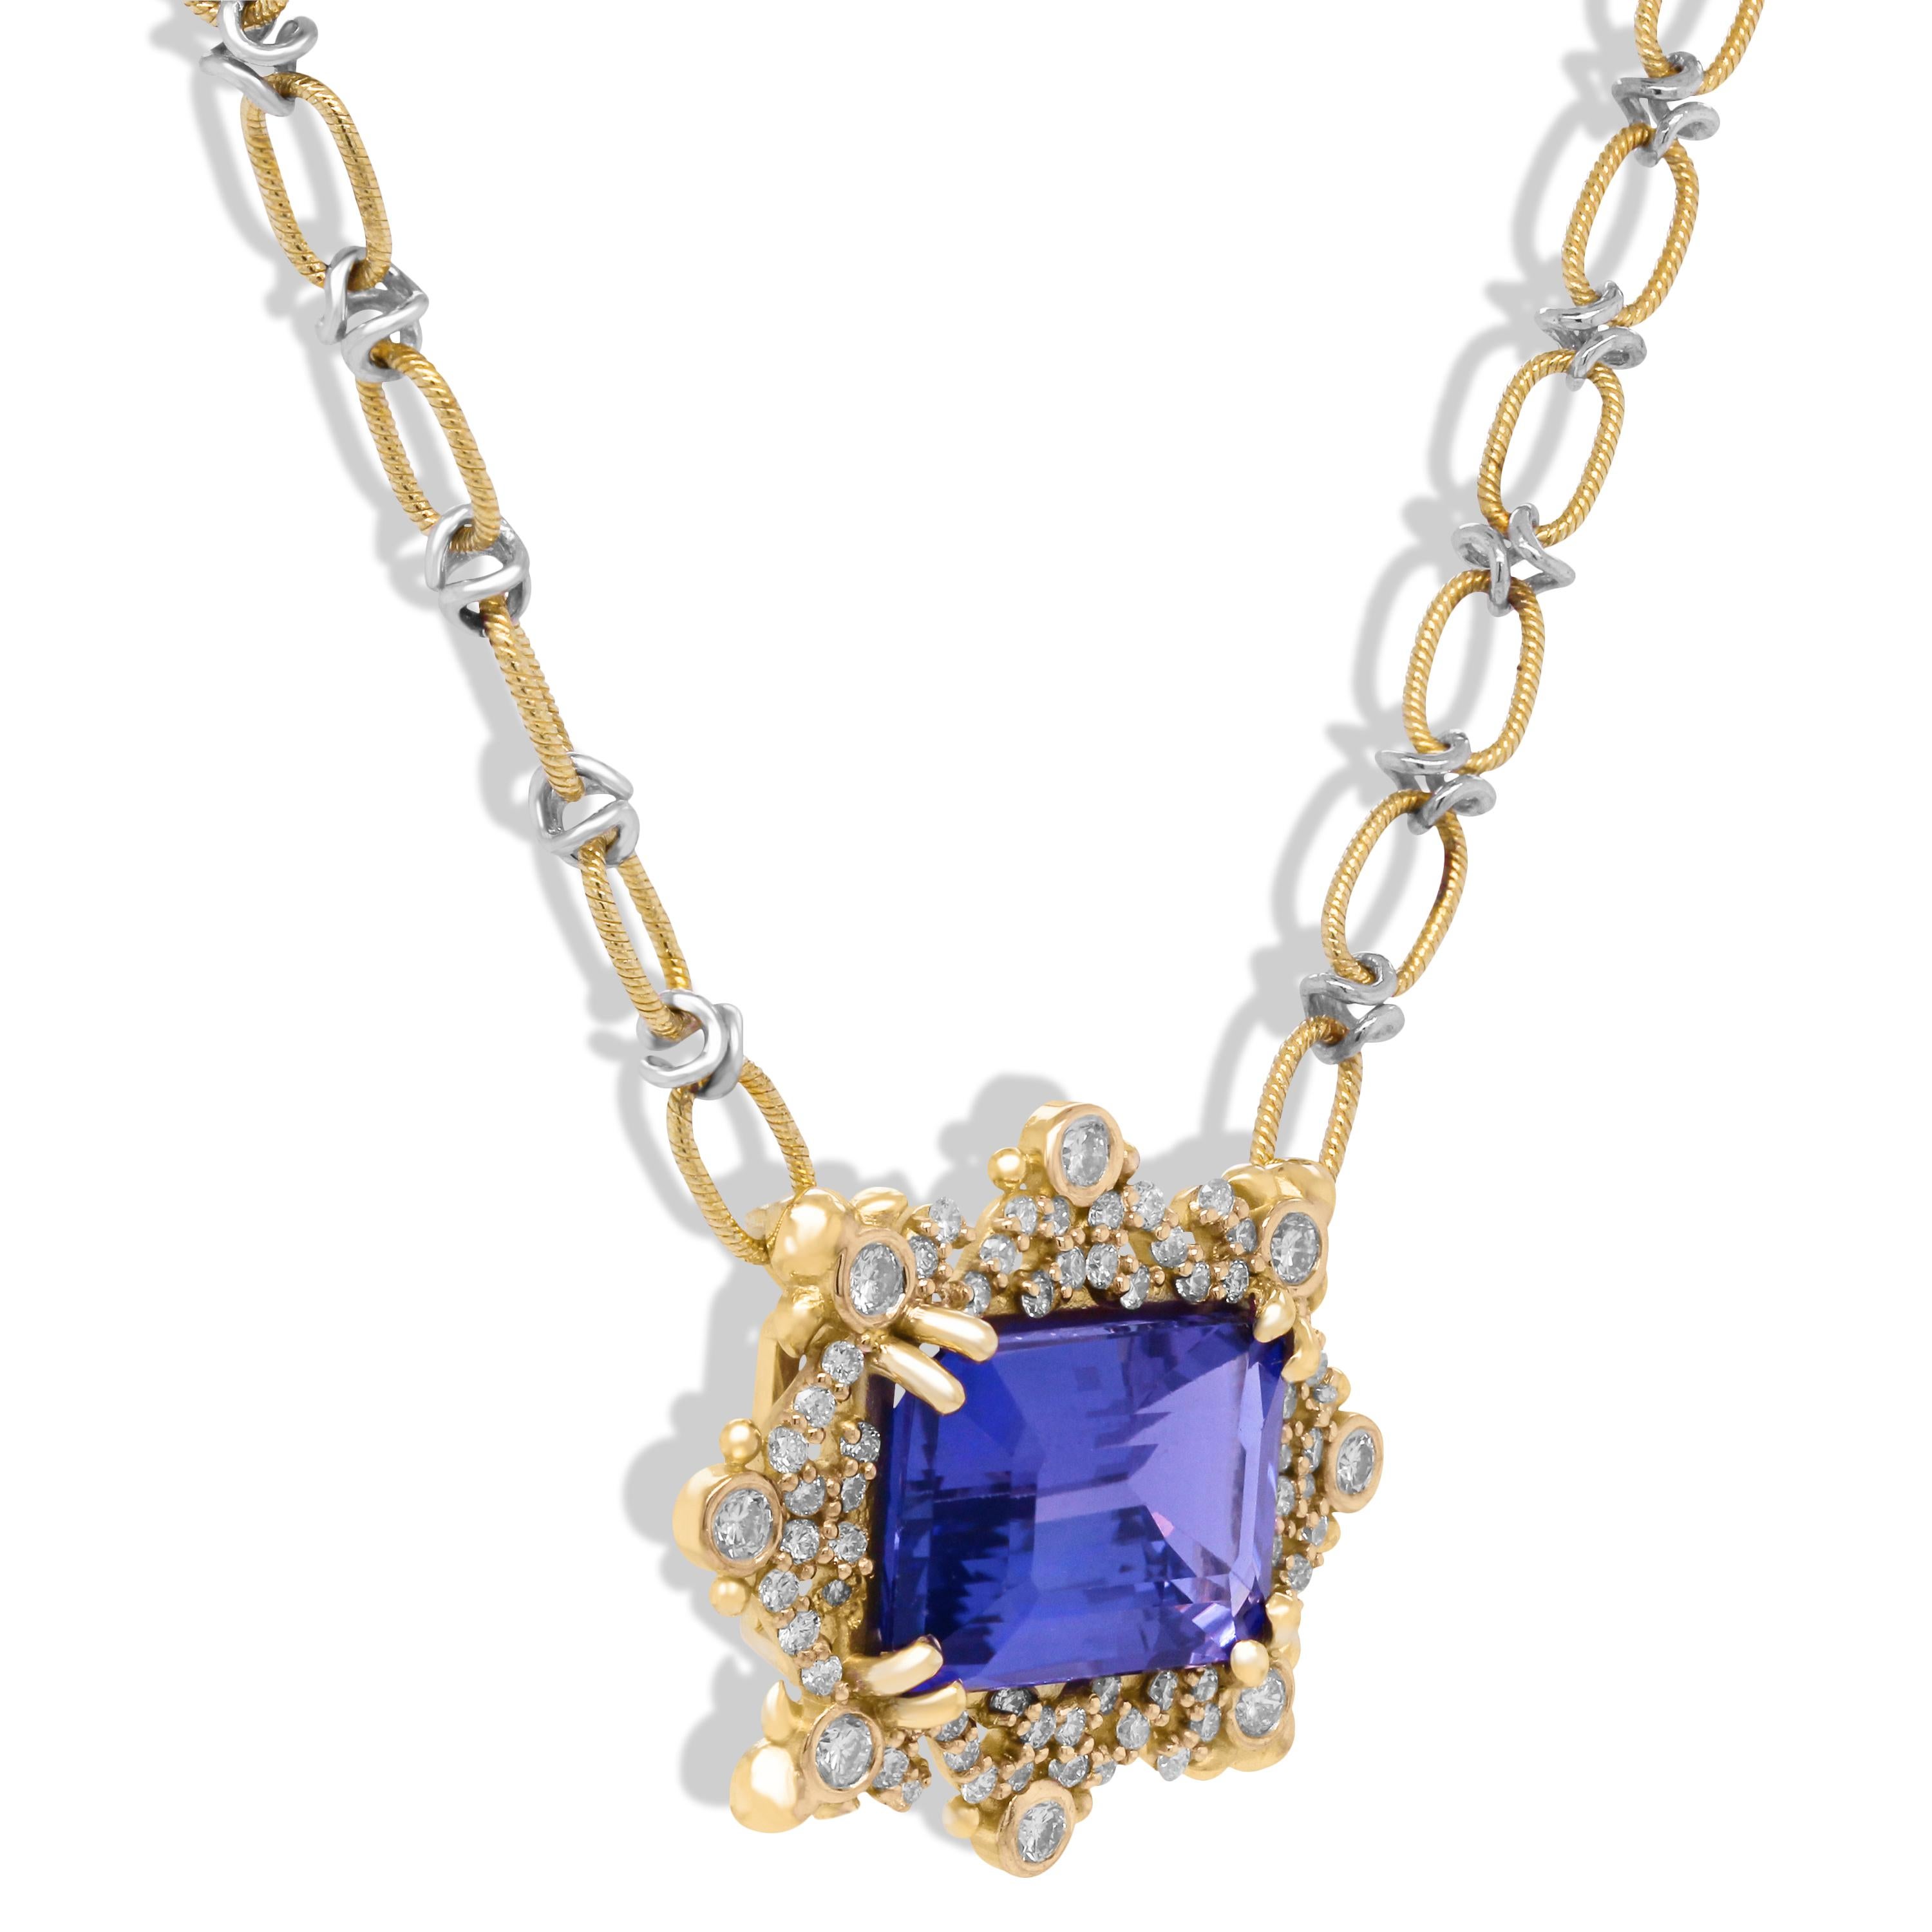 Stambolian 18K Two Tone Gold Diamond Emerald Cut Tanzanite Pendant Necklace

This one-of-a-kind pendant is attached to a two-tone, handmade chain and is made in entirely solid 18k gold.

Emerald-cut Tanzanite center is AAA quality and is 9.78